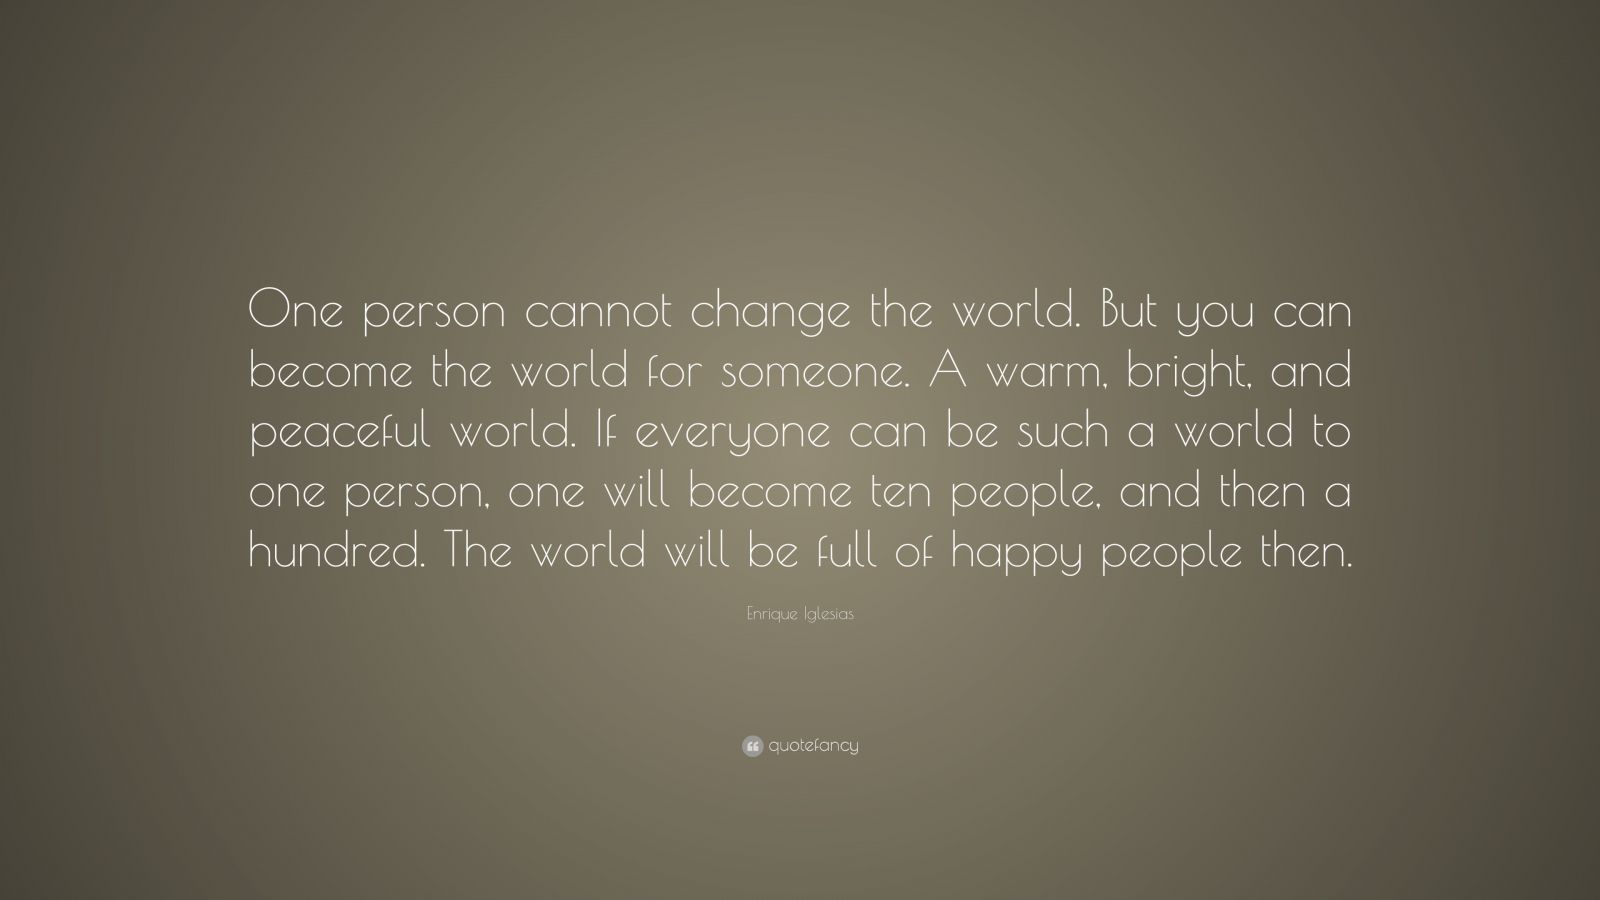 Enrique Iglesias Quote: "One person cannot change the ...